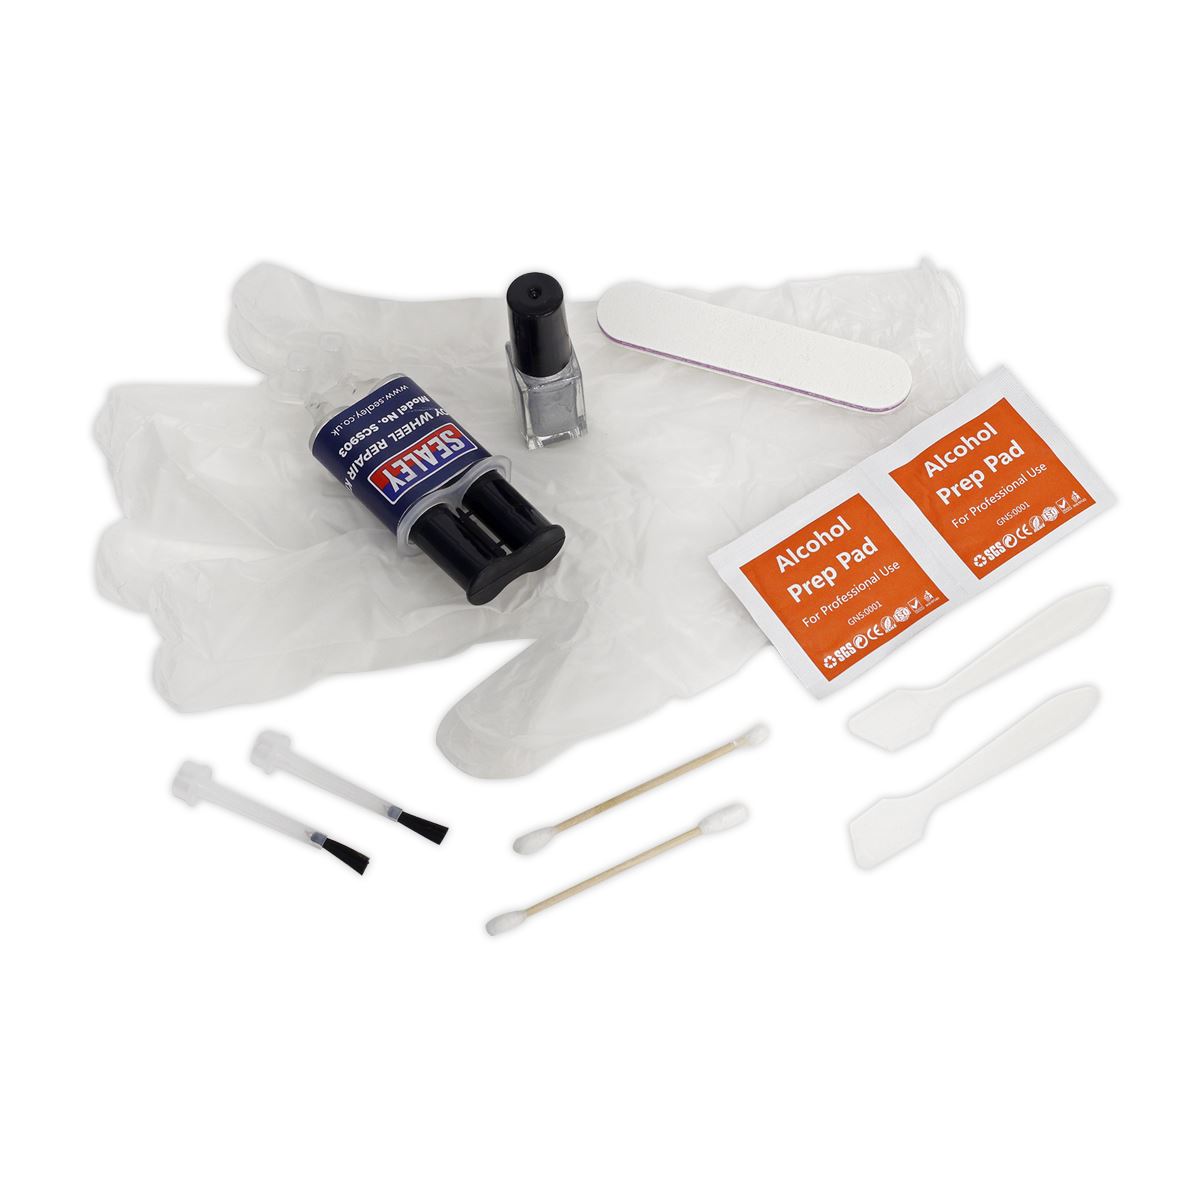 Sealey Alloy Wheel Repair Kit Repairs Cosmetic Damage Simply and Quickly